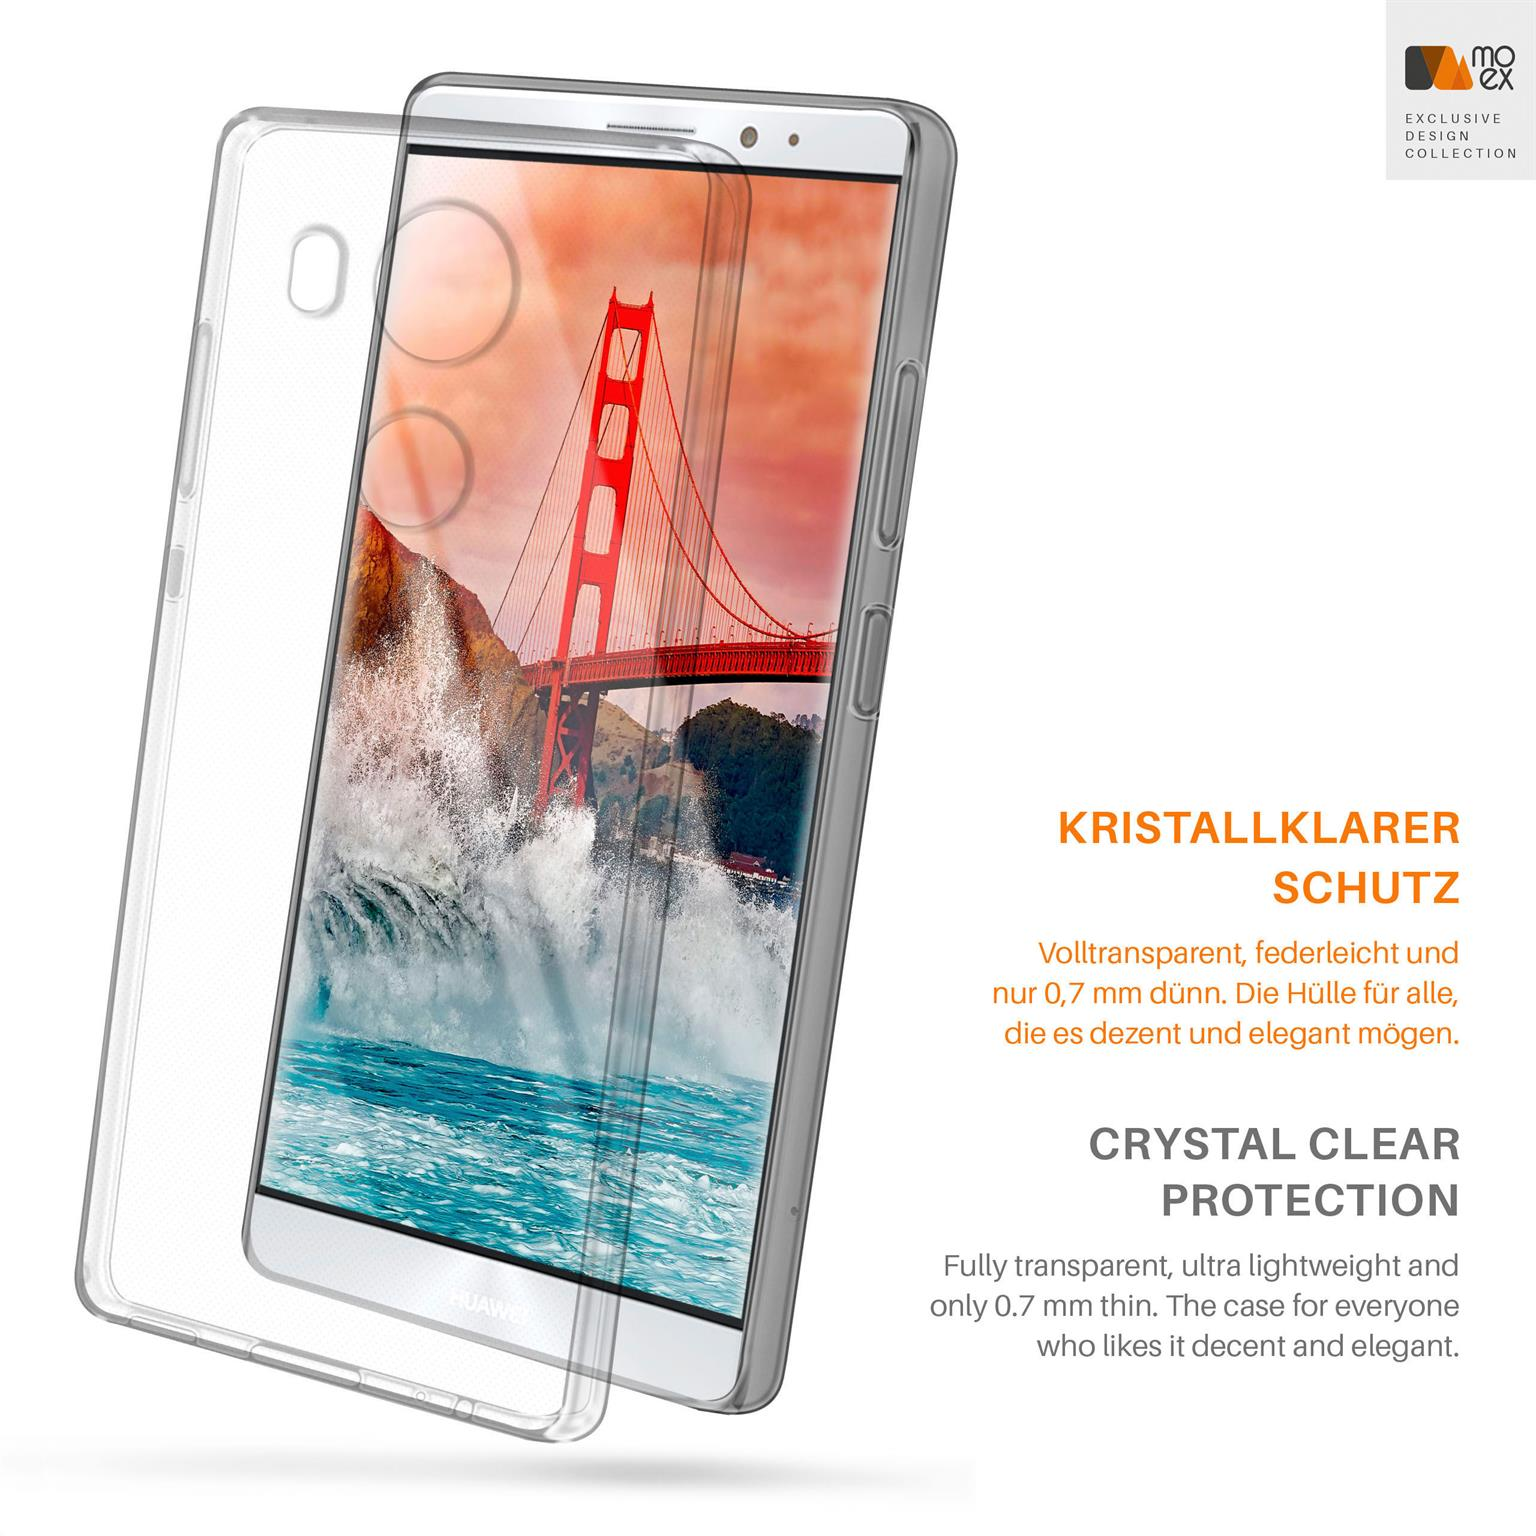 MOEX Aero Case, Backcover, Huawei, Mate Crystal-Clear 8